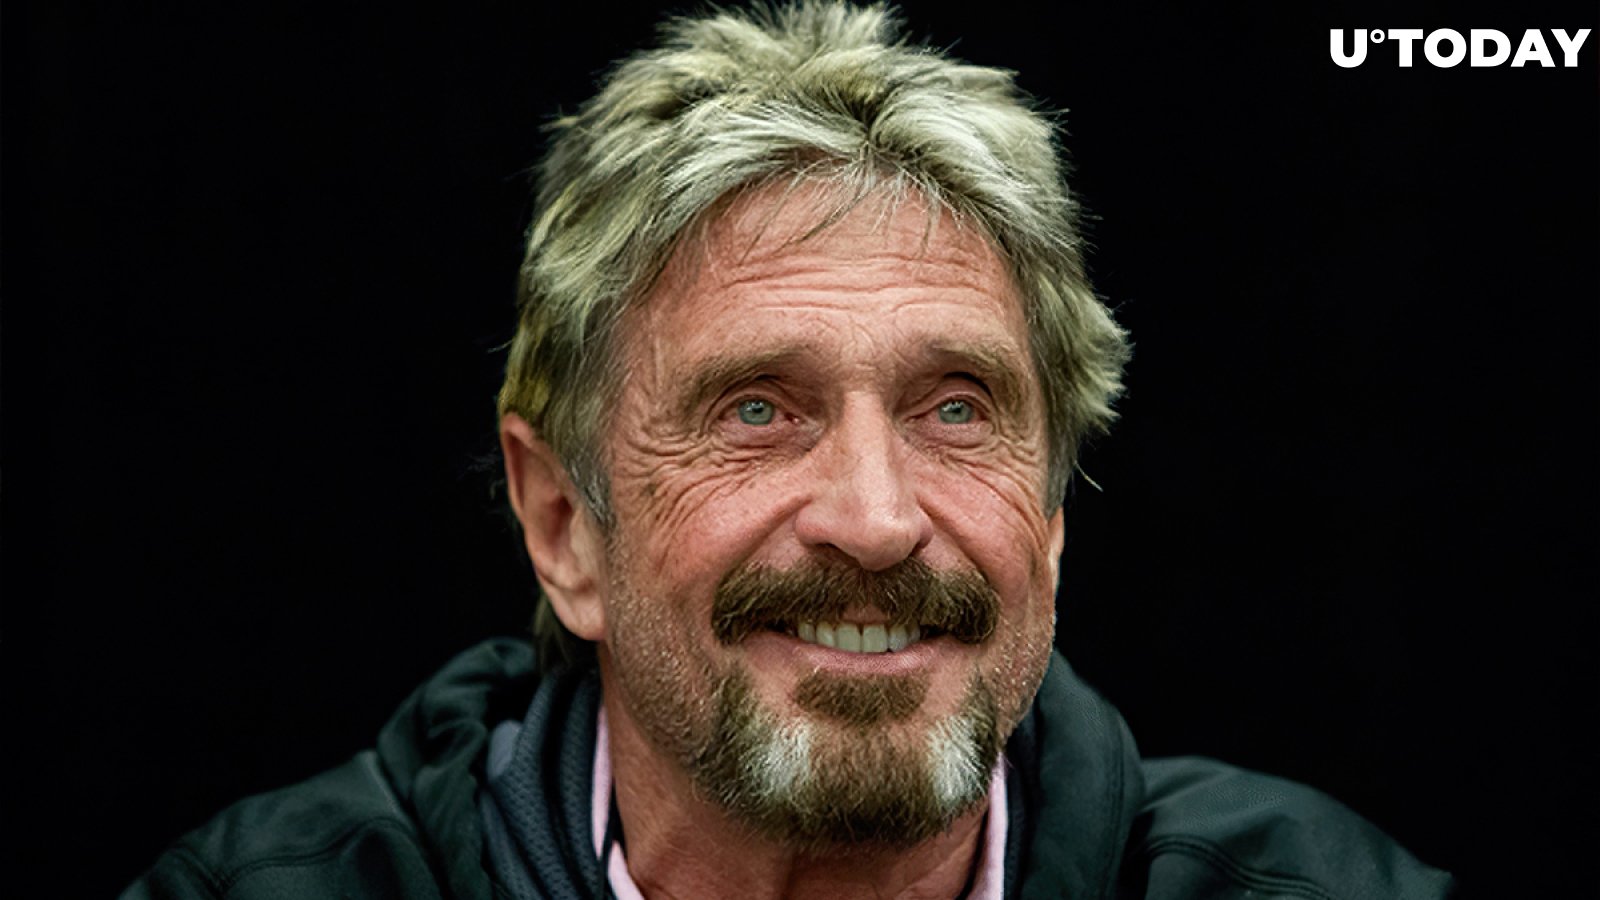 John McAfee Calls XRP Worthless, Claims MoneyGram Does Not Use It